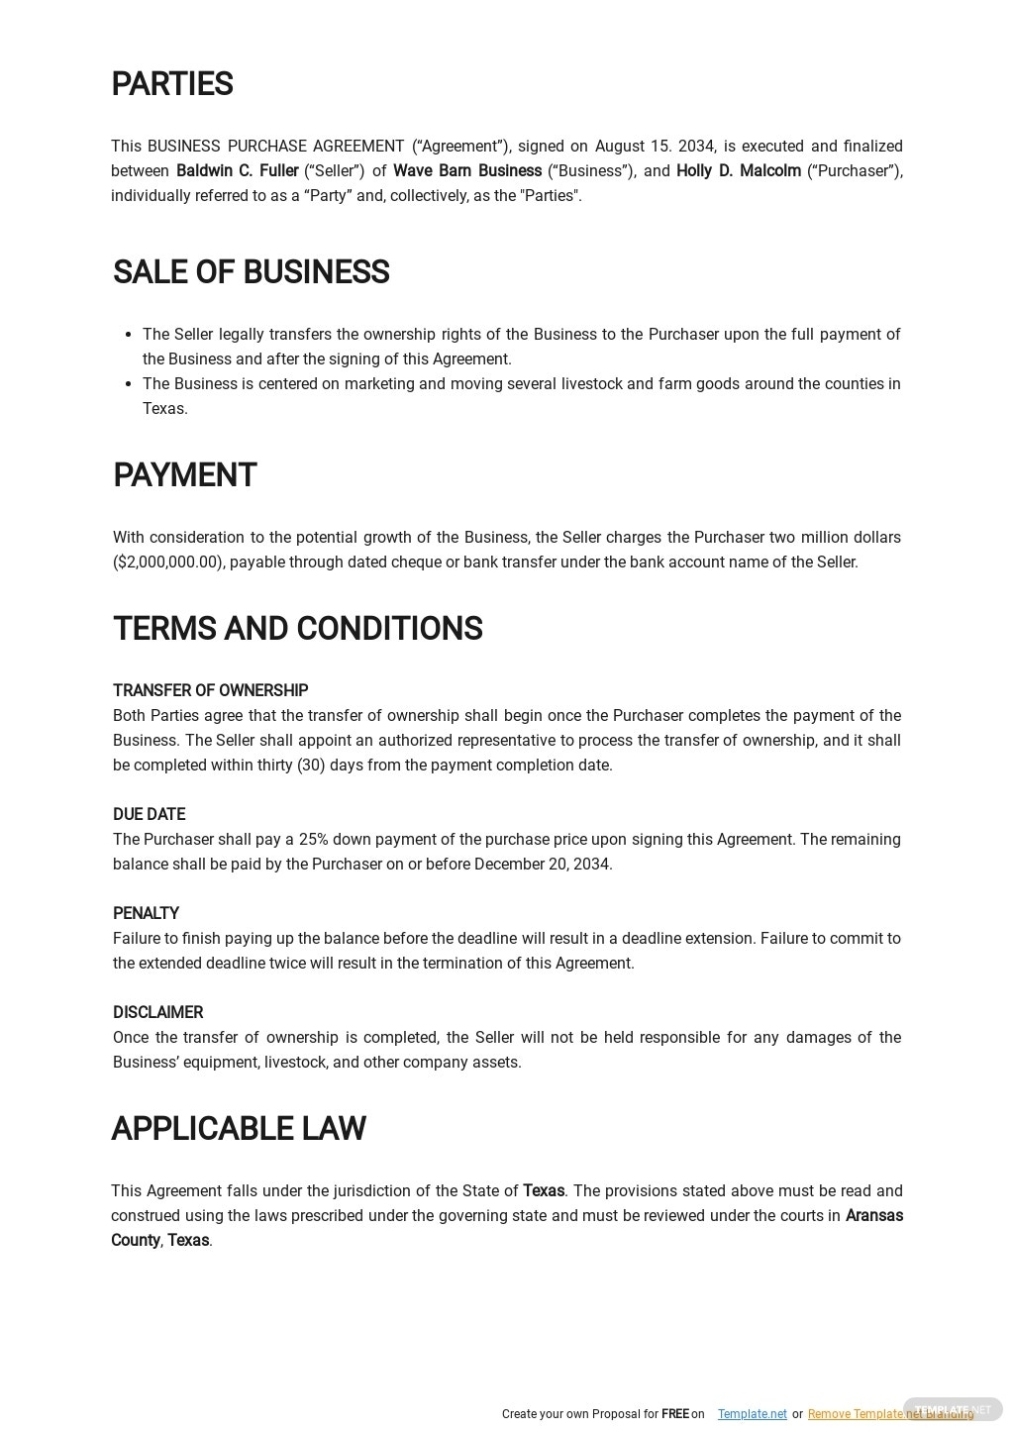 Business Purchase Agreement Template - Google Docs, Word | Template With Regard To Free Business Purchase Agreement Template